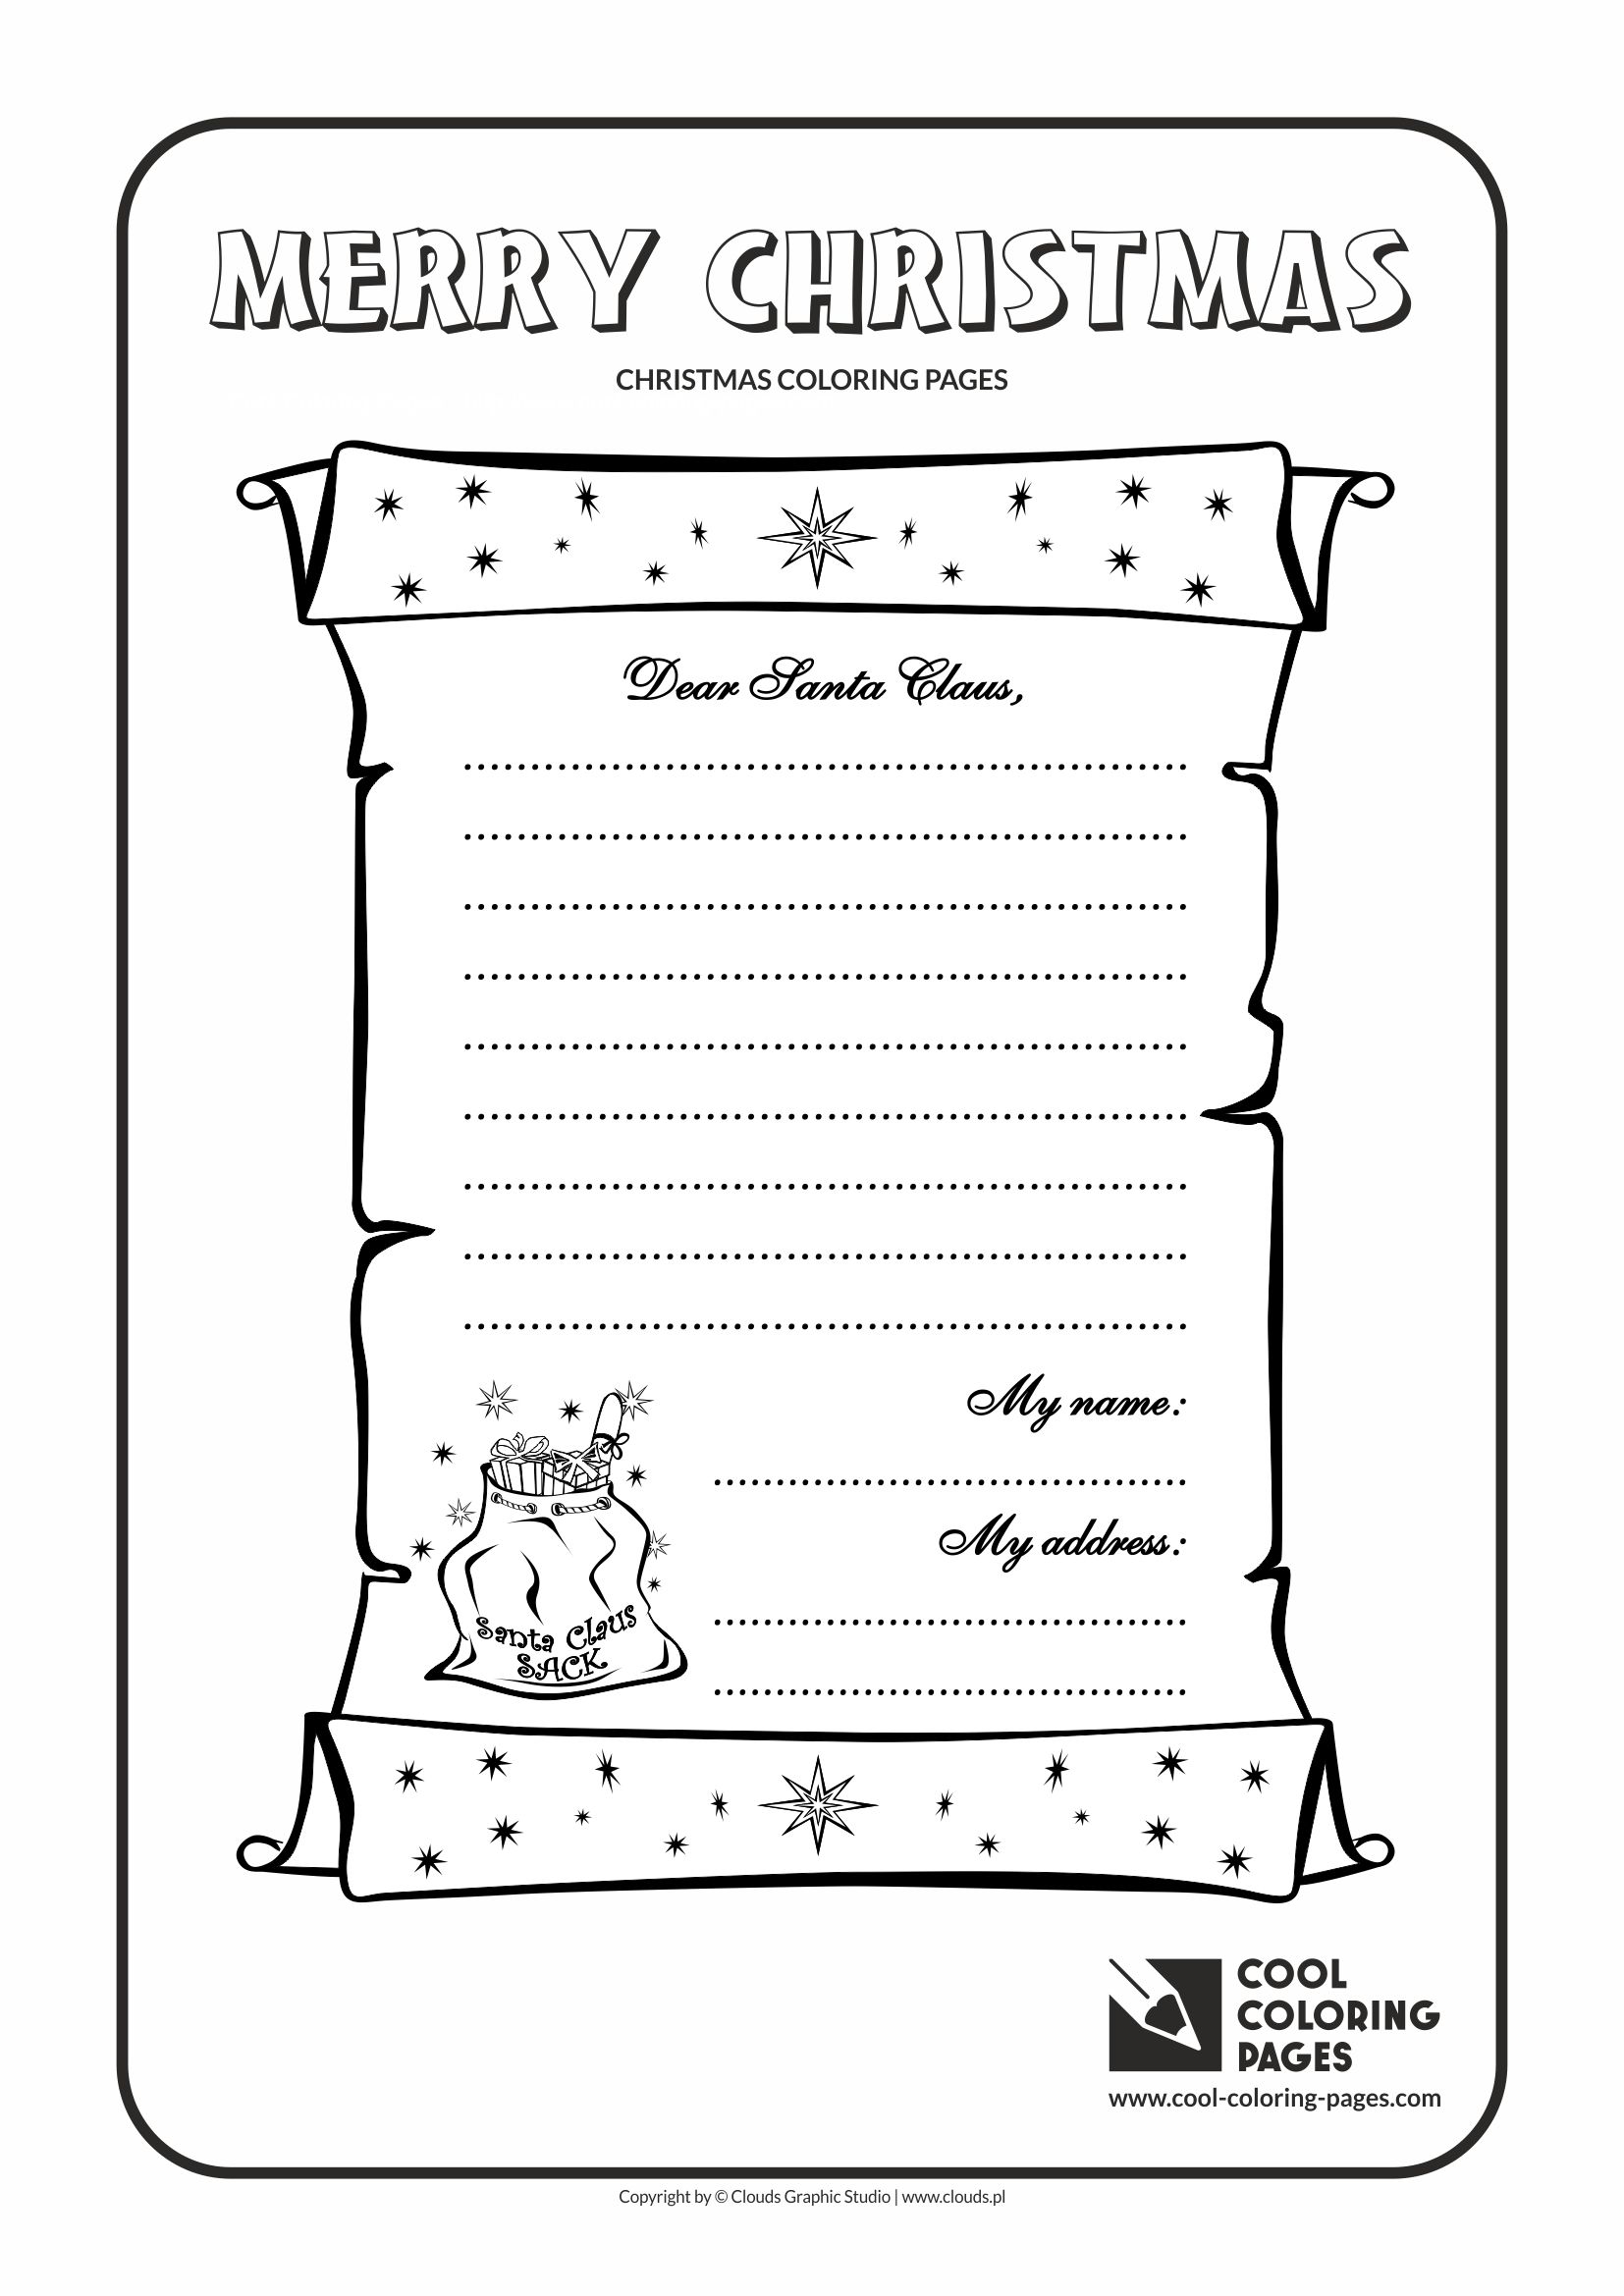 Cool Coloring Pages Letter to Santa Claus no 1 coloring page - Cool